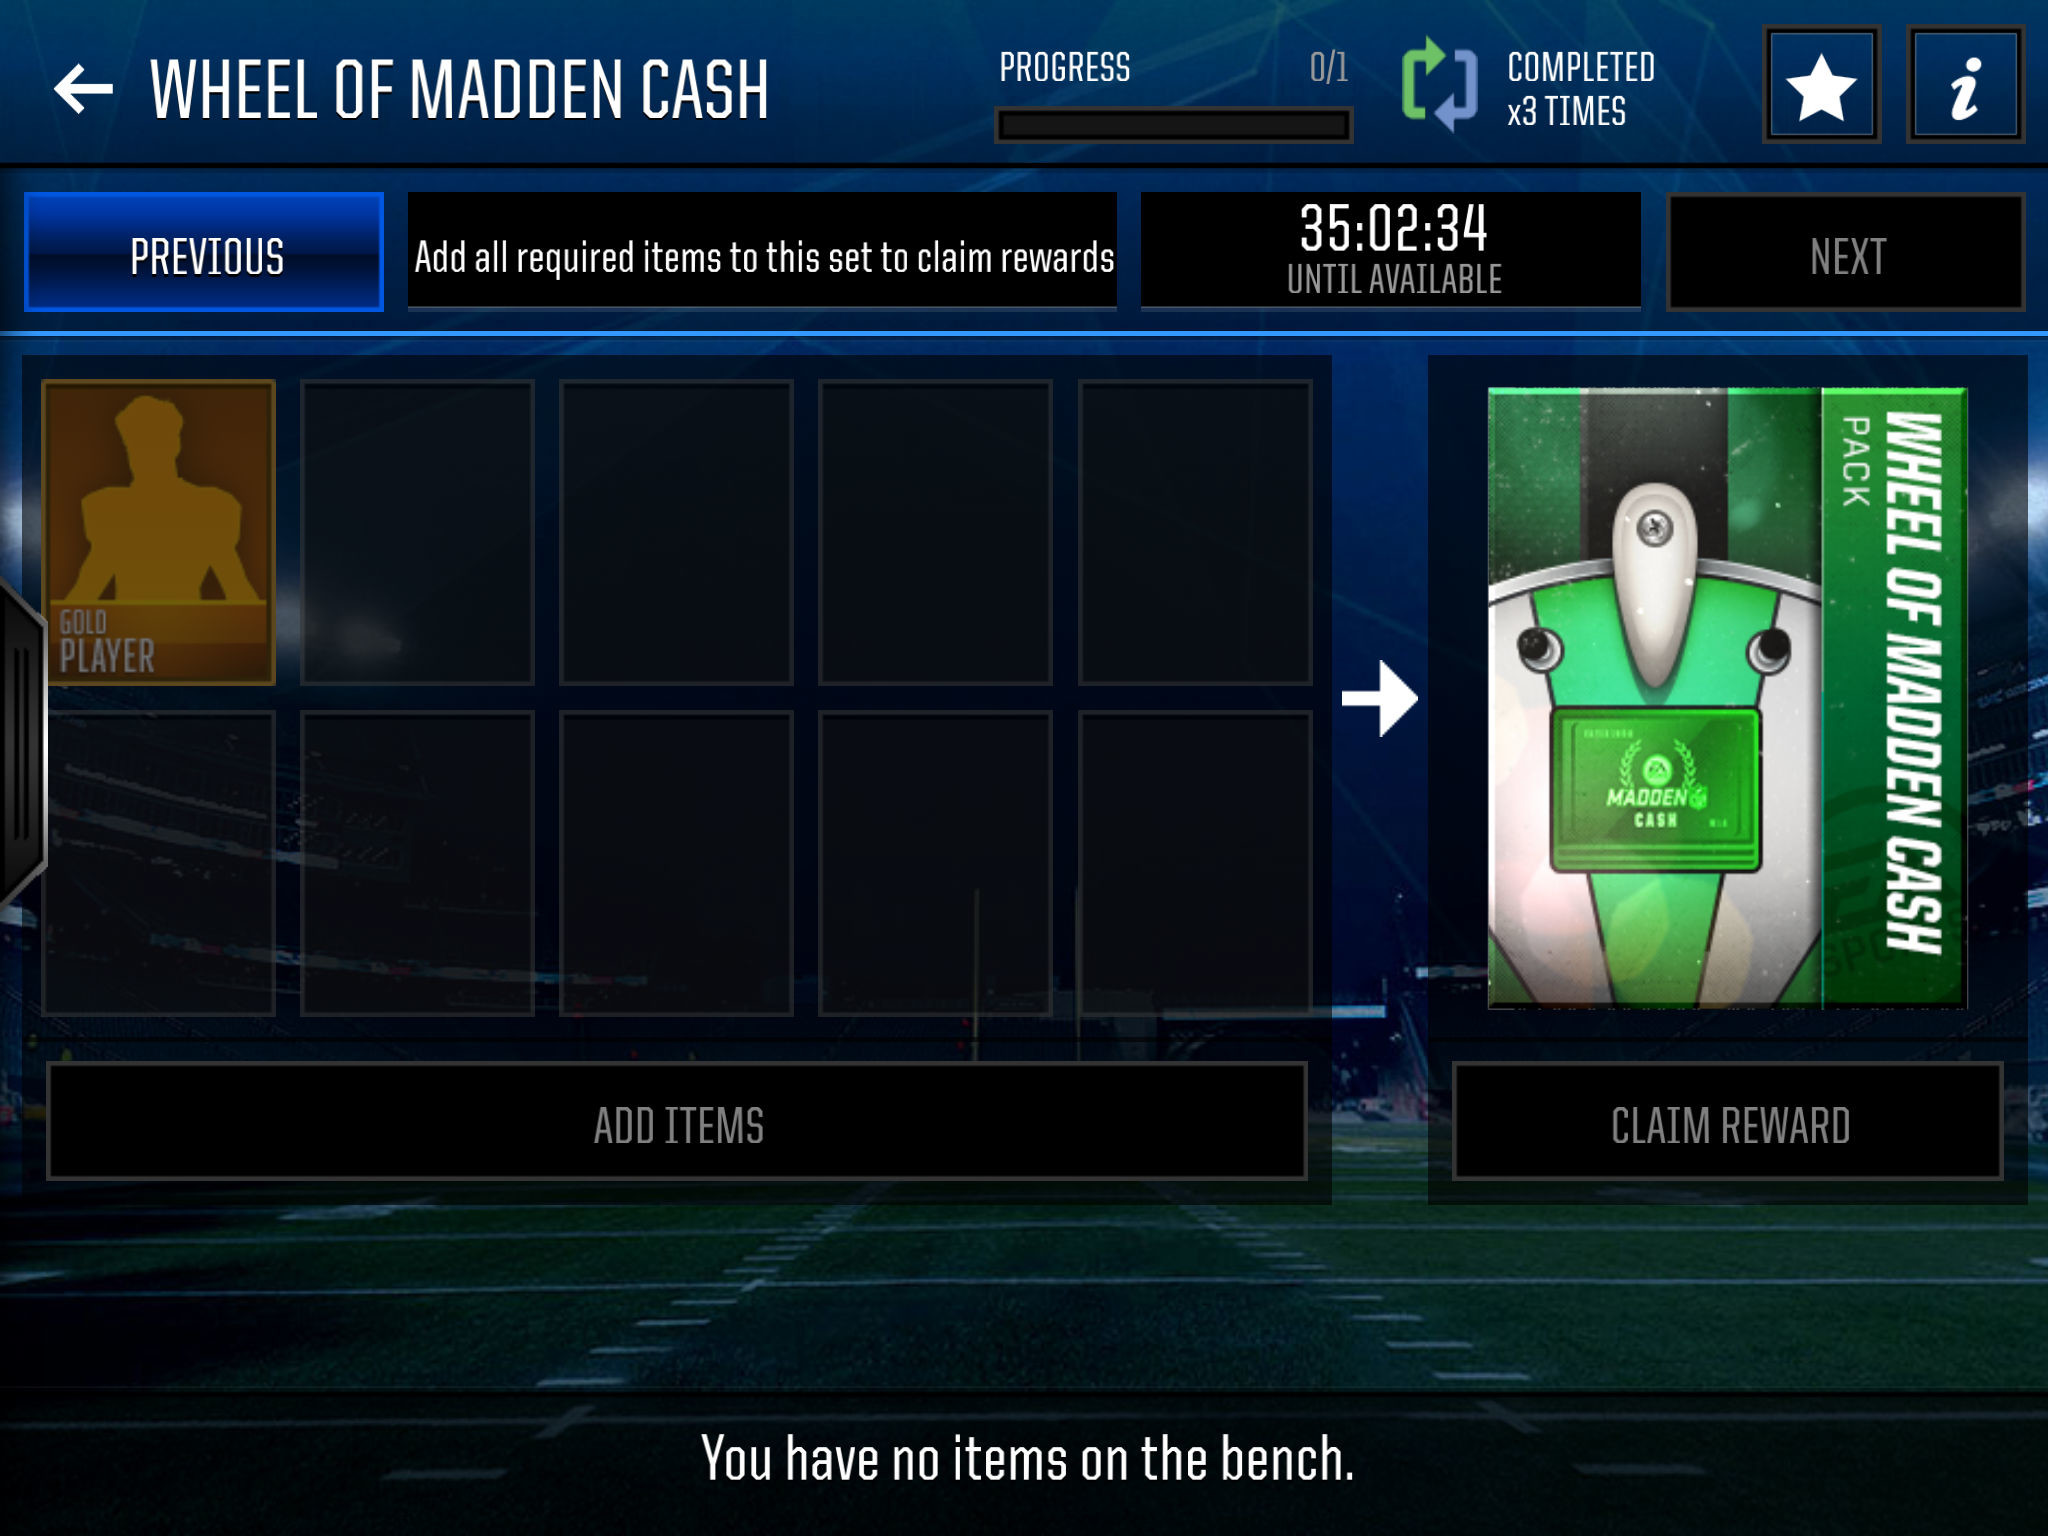 2048x1536 How to Get Free Madden Cash in Madden Mobile